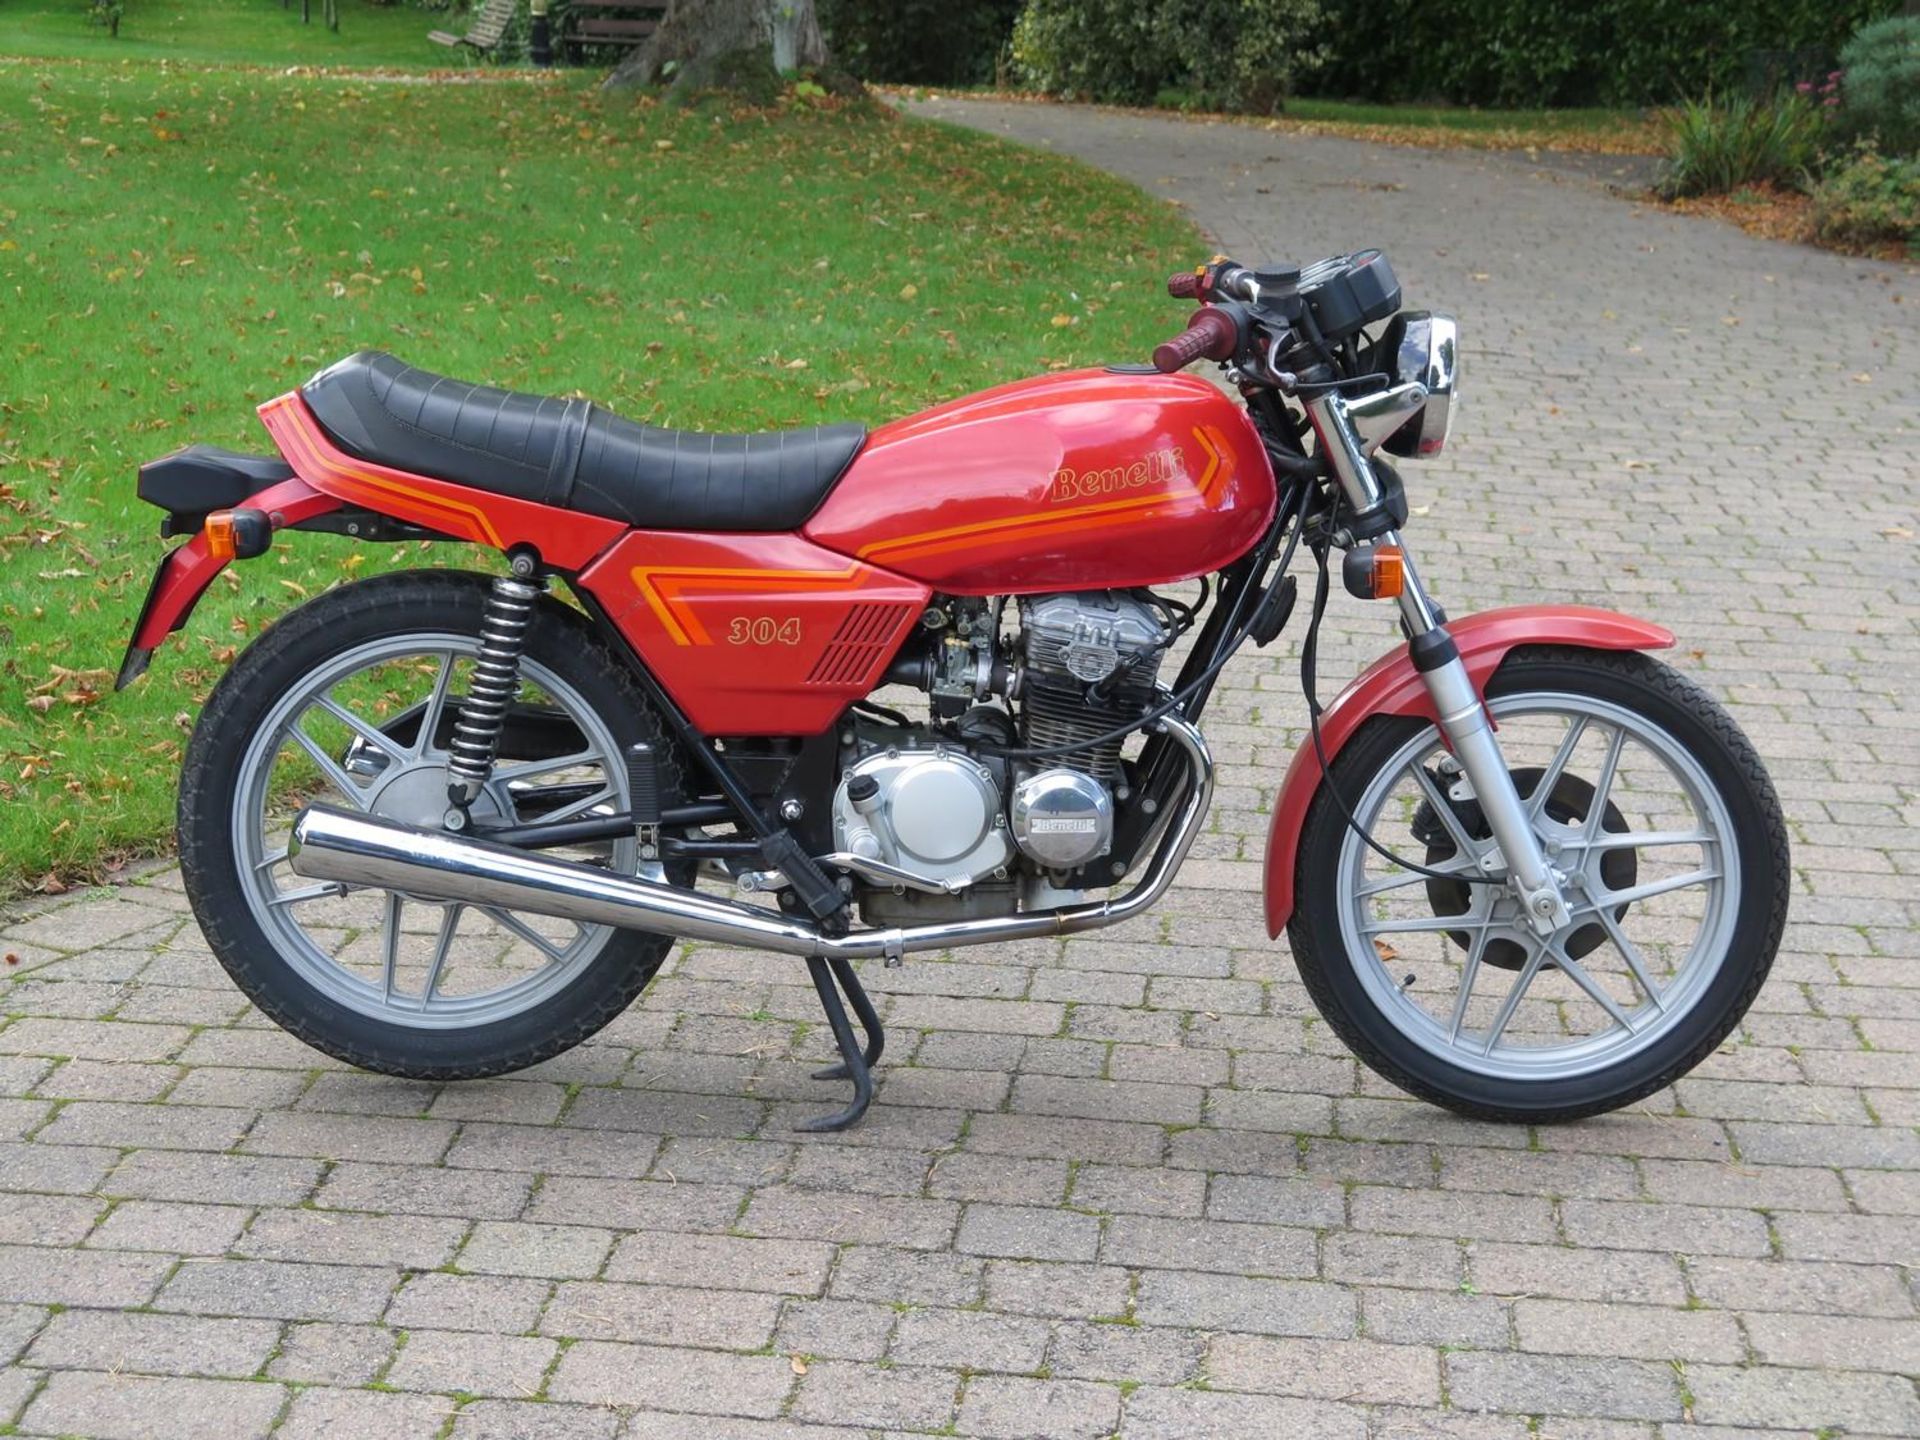 A 1983 Benelli 304 Frame number RO?10098 Engine number RH?6144 Mileage 8,074 Kms Original and